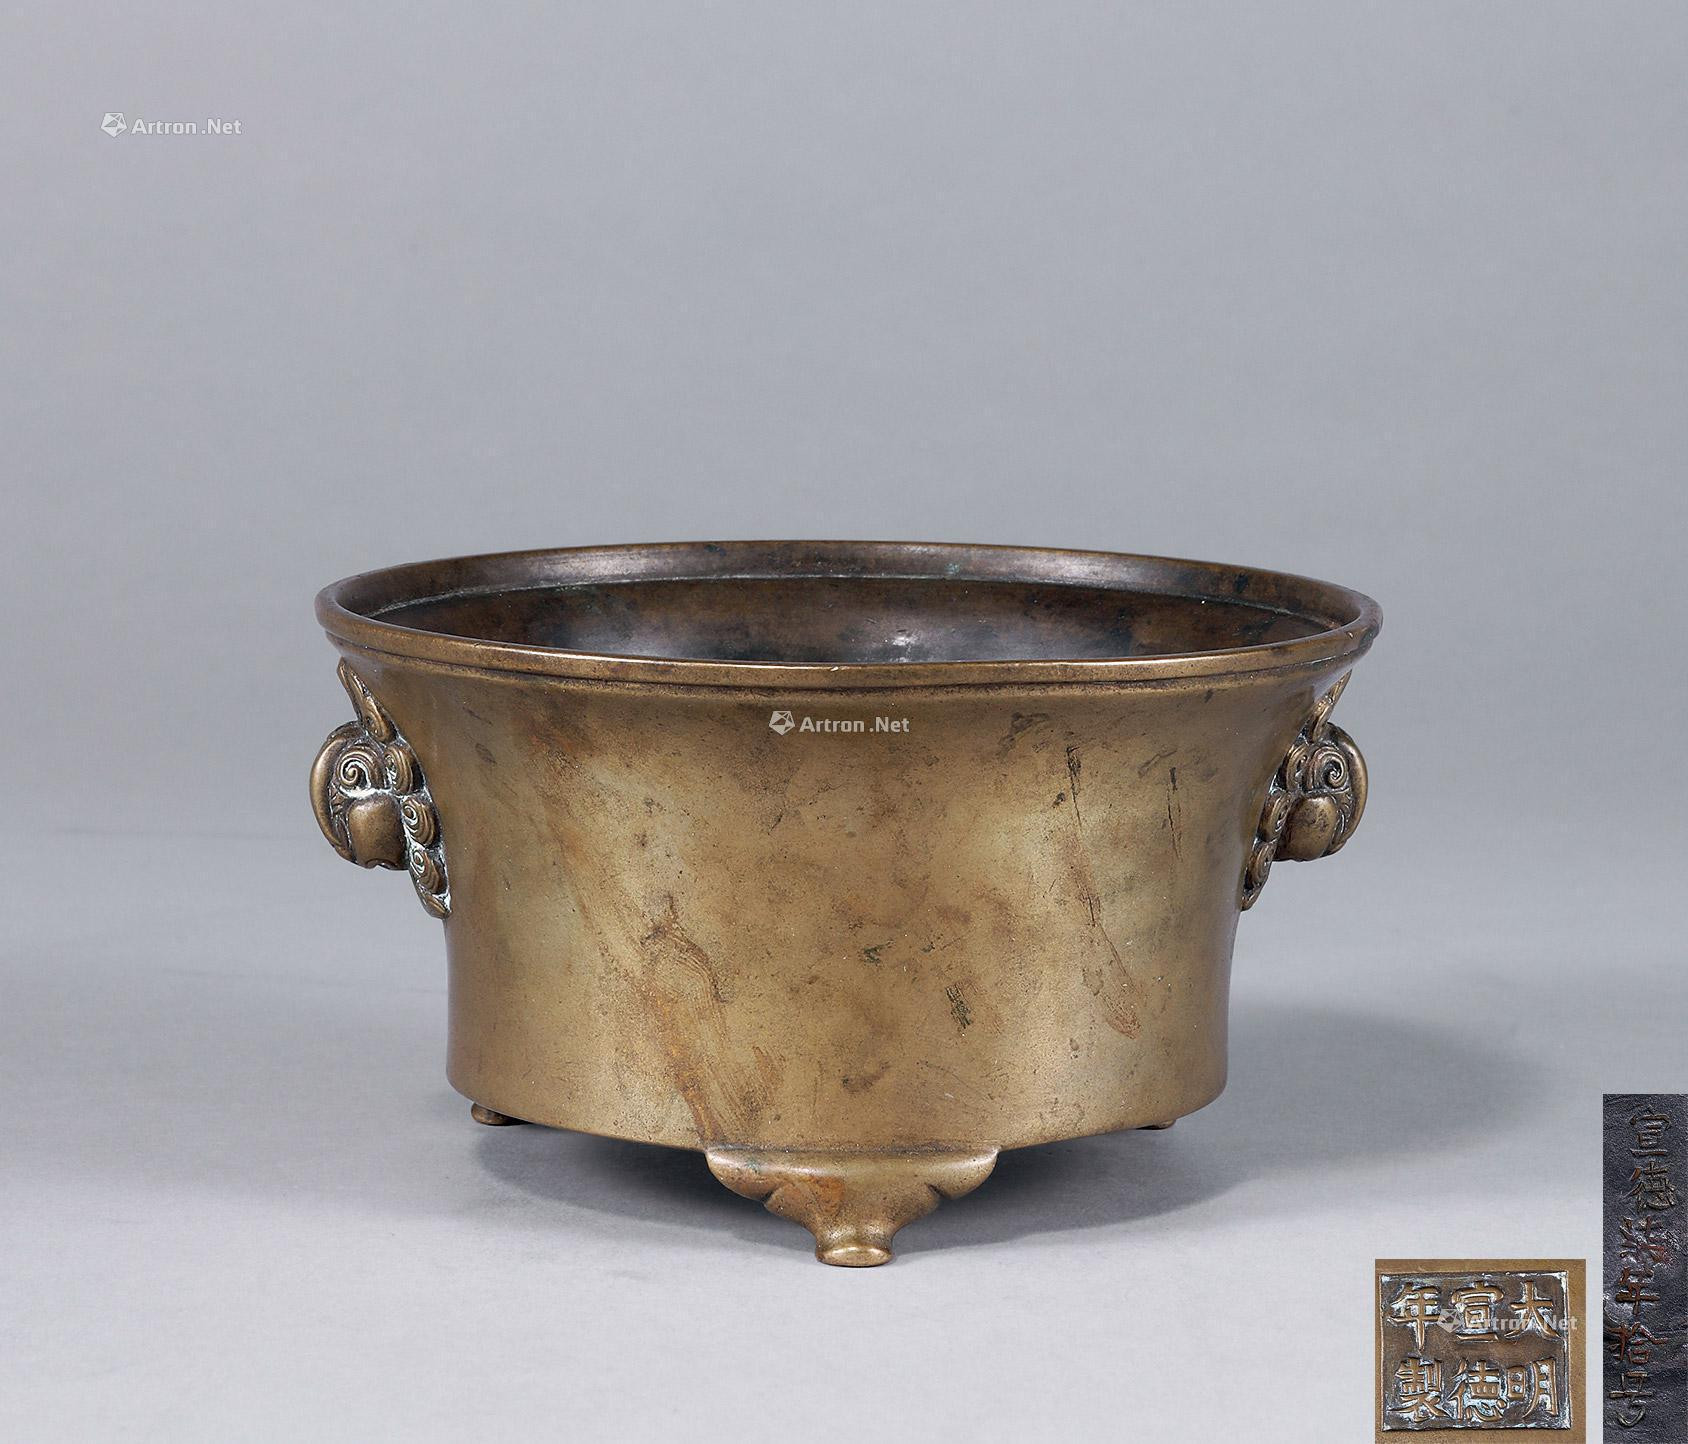 A BRONZE INCENSE BURNER WITH DOULE MYTHICAL BEAST EARRS